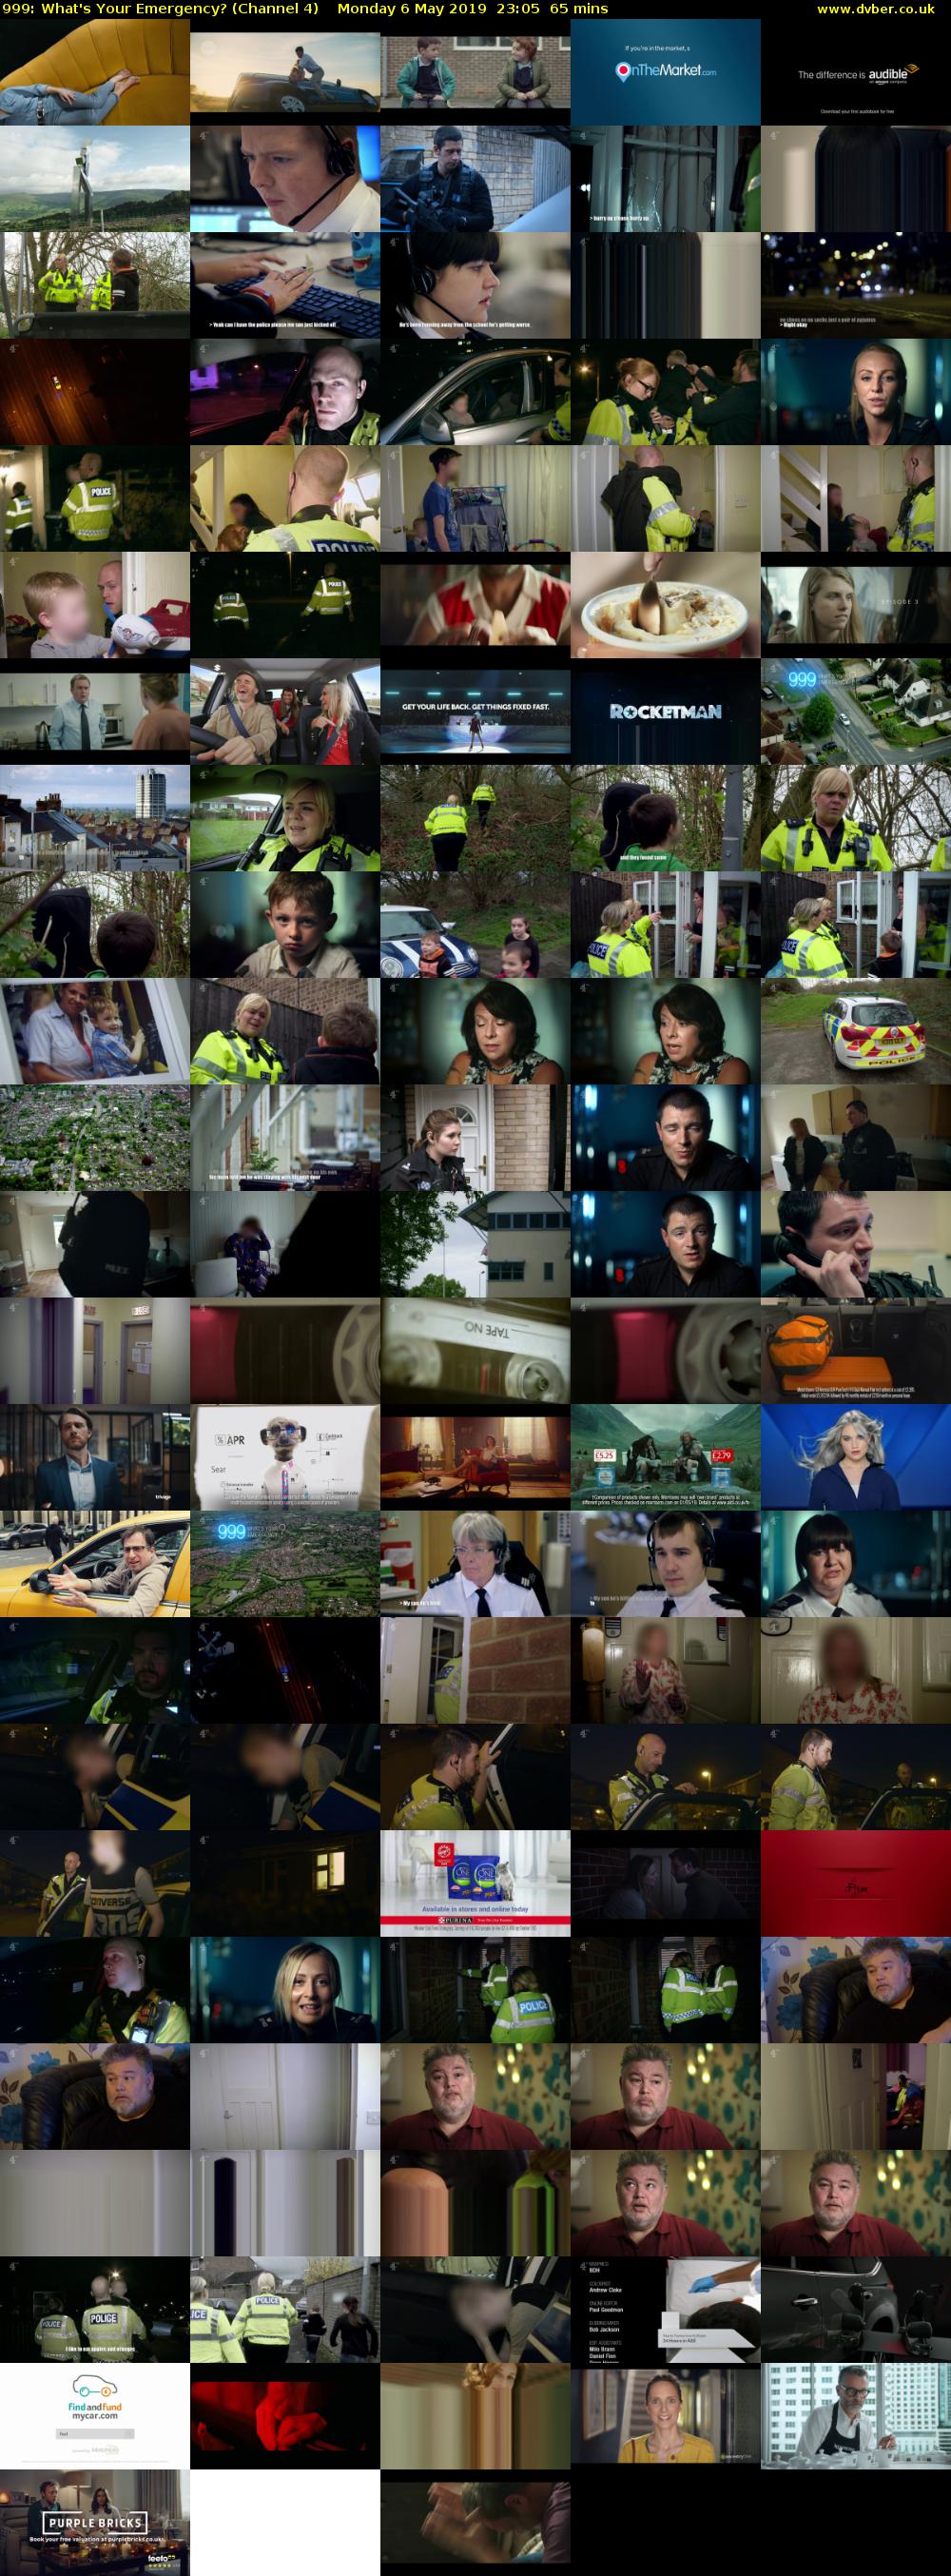 999: What's Your Emergency? (Channel 4) Monday 6 May 2019 23:05 - 00:10